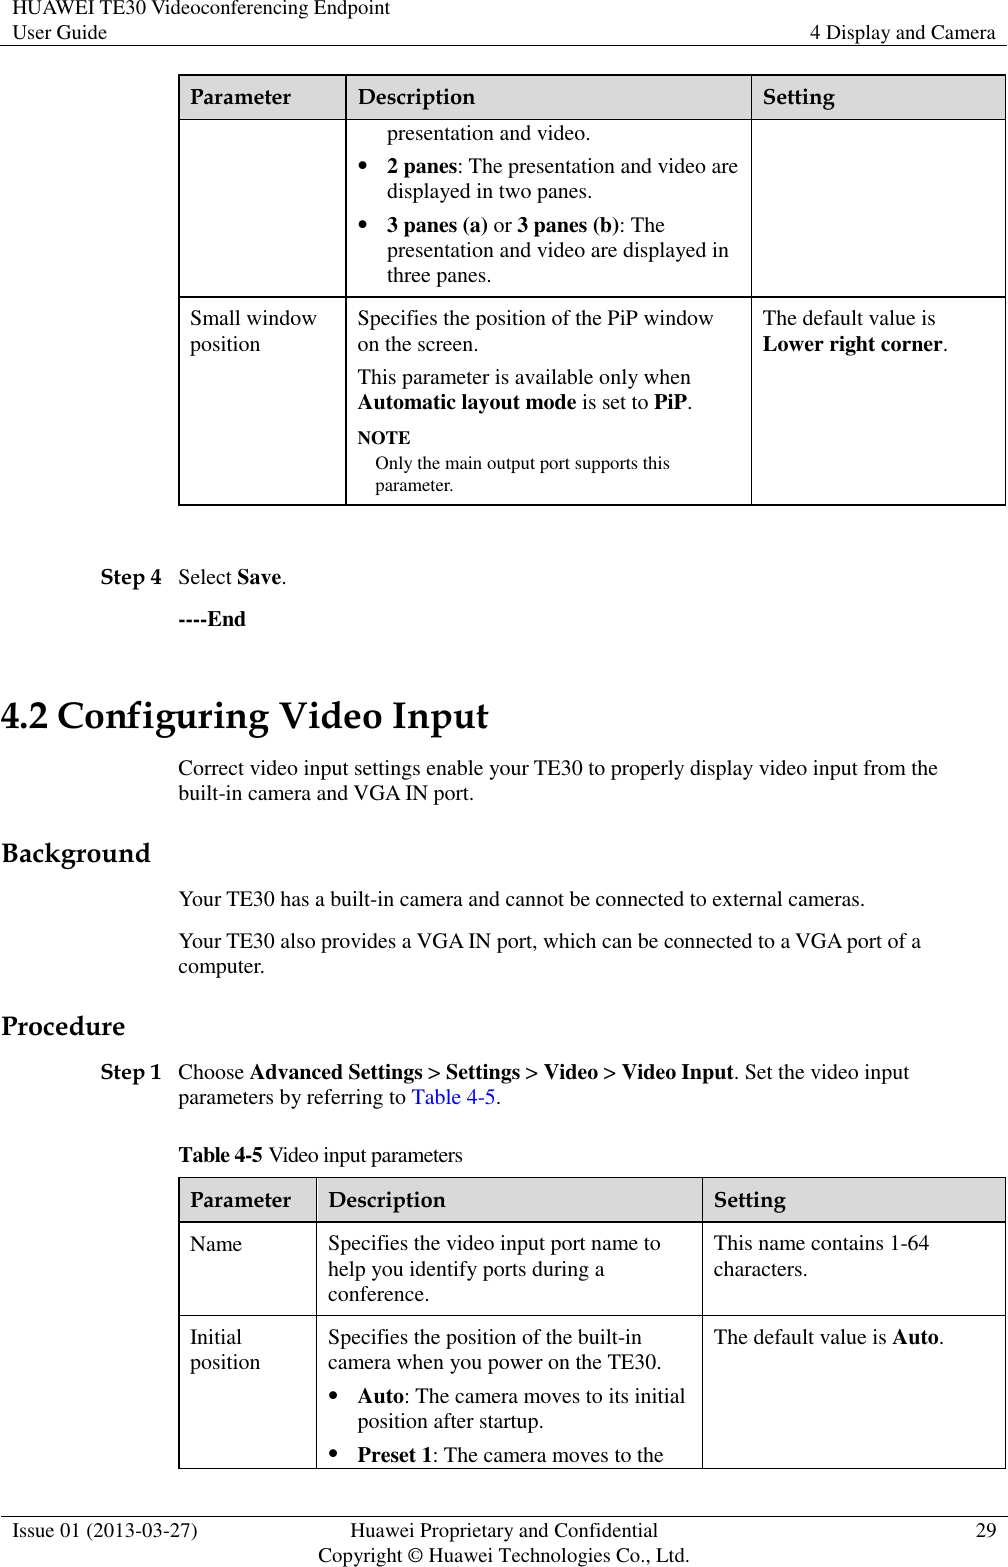 HUAWEI TE30 Videoconferencing Endpoint User Guide 4 Display and Camera  Issue 01 (2013-03-27) Huawei Proprietary and Confidential                                     Copyright © Huawei Technologies Co., Ltd. 29  Parameter Description Setting presentation and video.  2 panes: The presentation and video are displayed in two panes.  3 panes (a) or 3 panes (b): The presentation and video are displayed in three panes. Small window position Specifies the position of the PiP window on the screen.   This parameter is available only when Automatic layout mode is set to PiP. NOTE Only the main output port supports this parameter. The default value is Lower right corner.  Step 4 Select Save. ----End 4.2 Configuring Video Input Correct video input settings enable your TE30 to properly display video input from the built-in camera and VGA IN port. Background Your TE30 has a built-in camera and cannot be connected to external cameras. Your TE30 also provides a VGA IN port, which can be connected to a VGA port of a computer. Procedure Step 1 Choose Advanced Settings &gt; Settings &gt; Video &gt; Video Input. Set the video input parameters by referring to Table 4-5. Table 4-5 Video input parameters Parameter Description Setting Name Specifies the video input port name to help you identify ports during a conference. This name contains 1-64 characters. Initial position Specifies the position of the built-in camera when you power on the TE30.  Auto: The camera moves to its initial position after startup.  Preset 1: The camera moves to the The default value is Auto. 